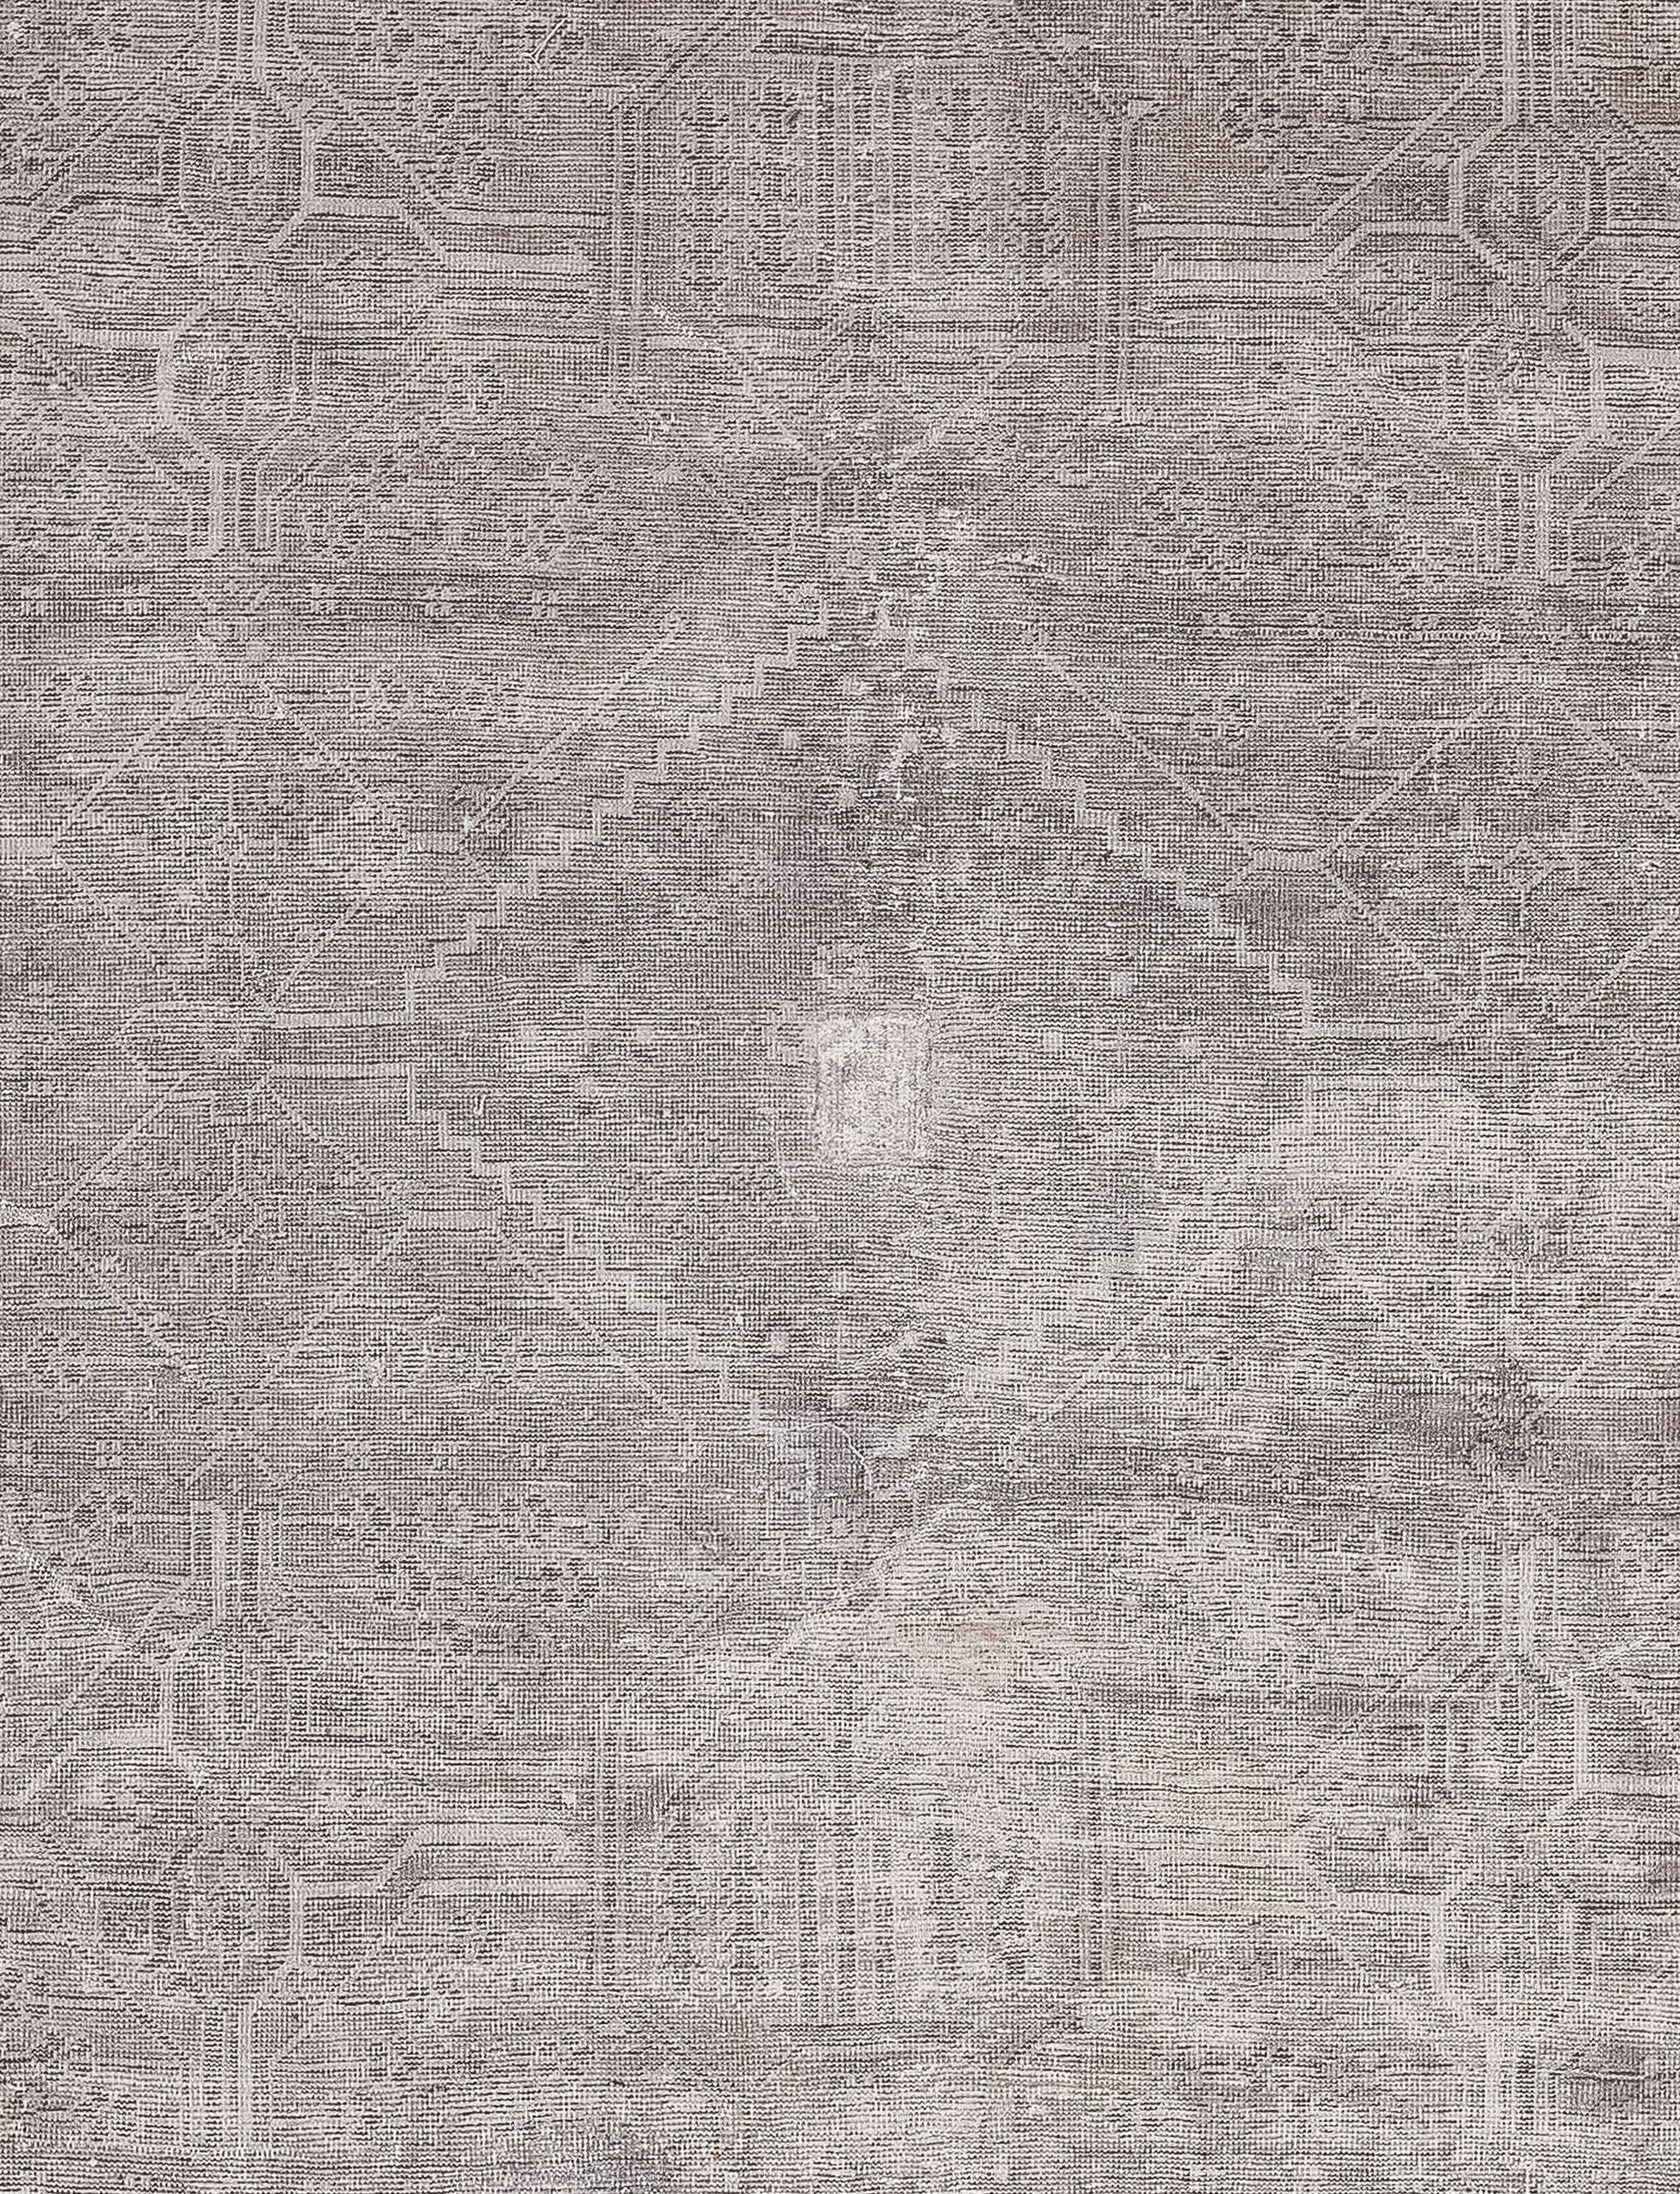 The center of the rug features two fused pyramids creating a diamond shape with abstract polygons merged on each edge. 